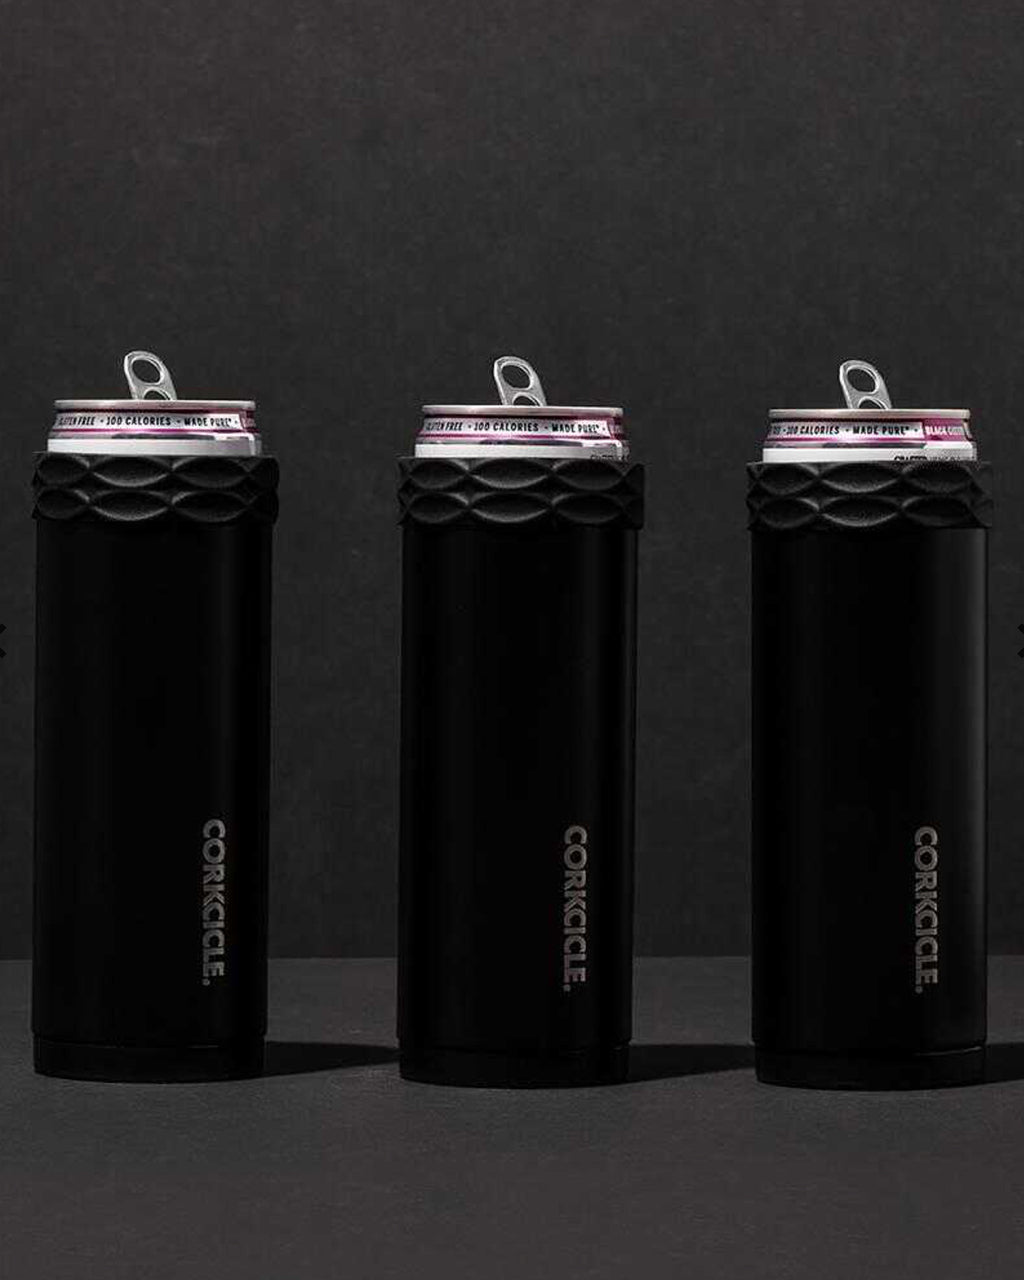 Corkcicle® Slim Arctican Can Cooler - Promotional Giveaway